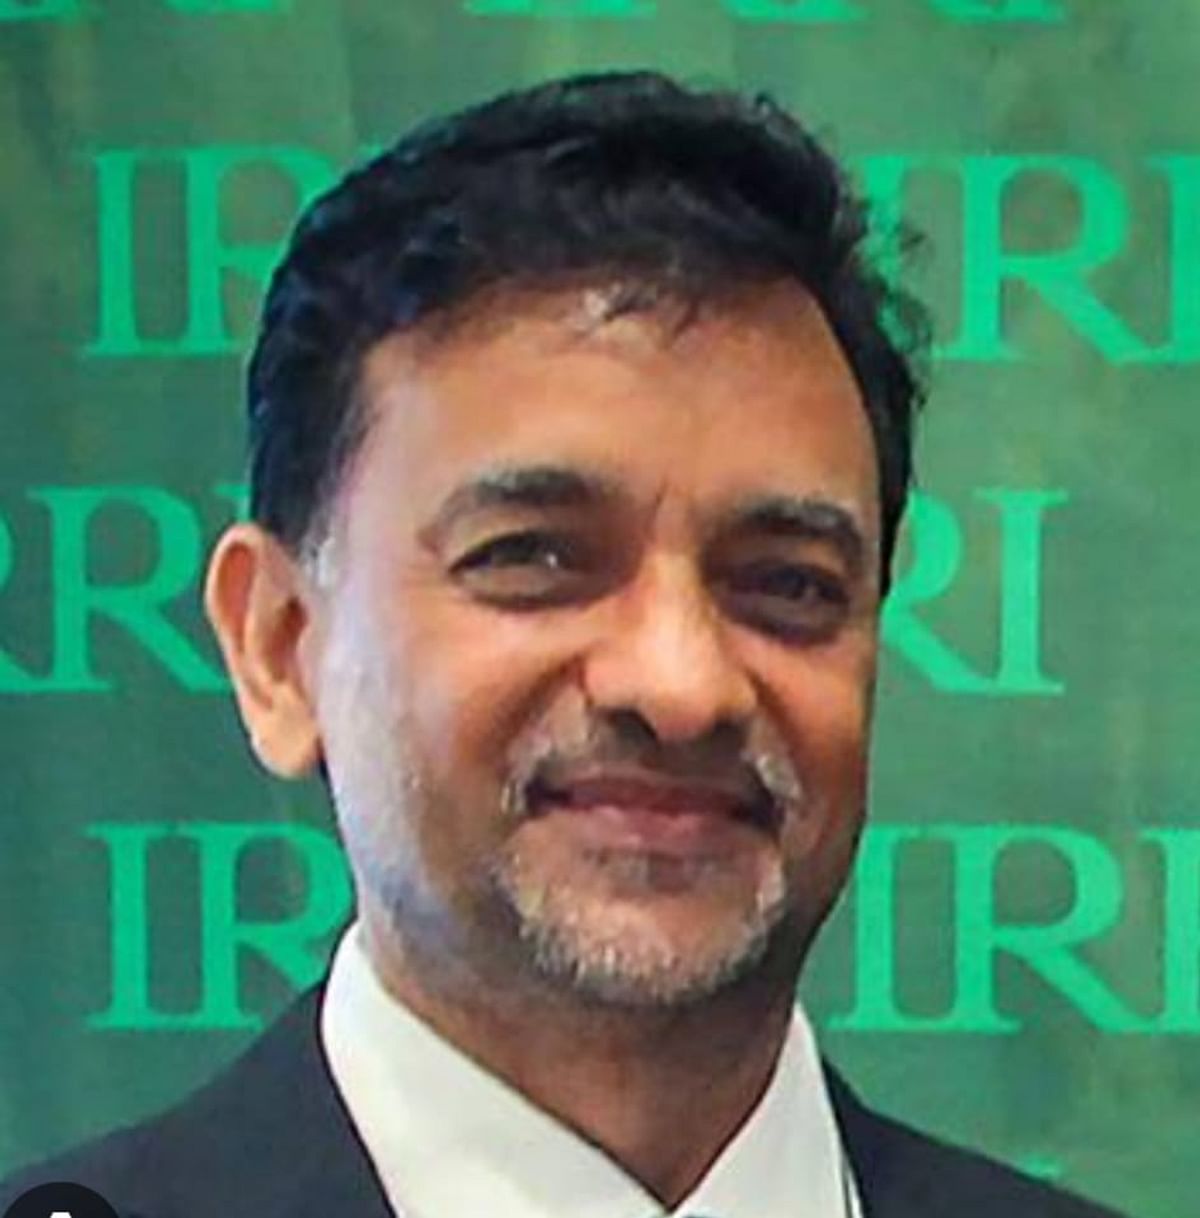 Agricultural scientist Dr. Ajay Kohli became the interim director general of the International Rice Research Institute